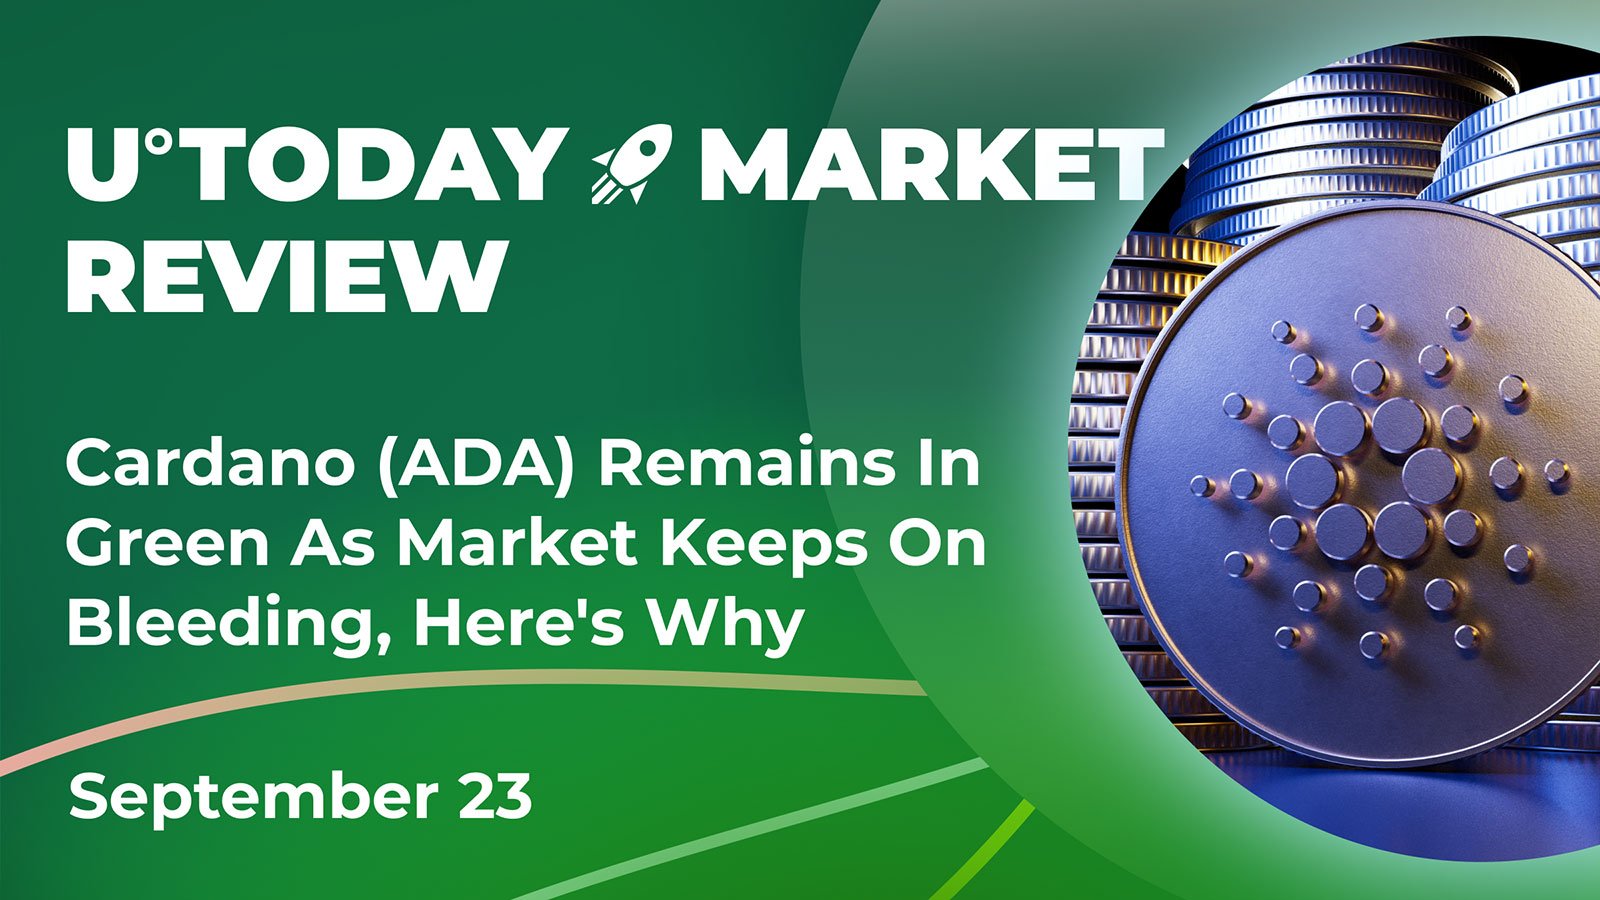 Cardano (ADA) Remains In Green As Market Keeps On Bleeding: Crypto Market Review, September 23